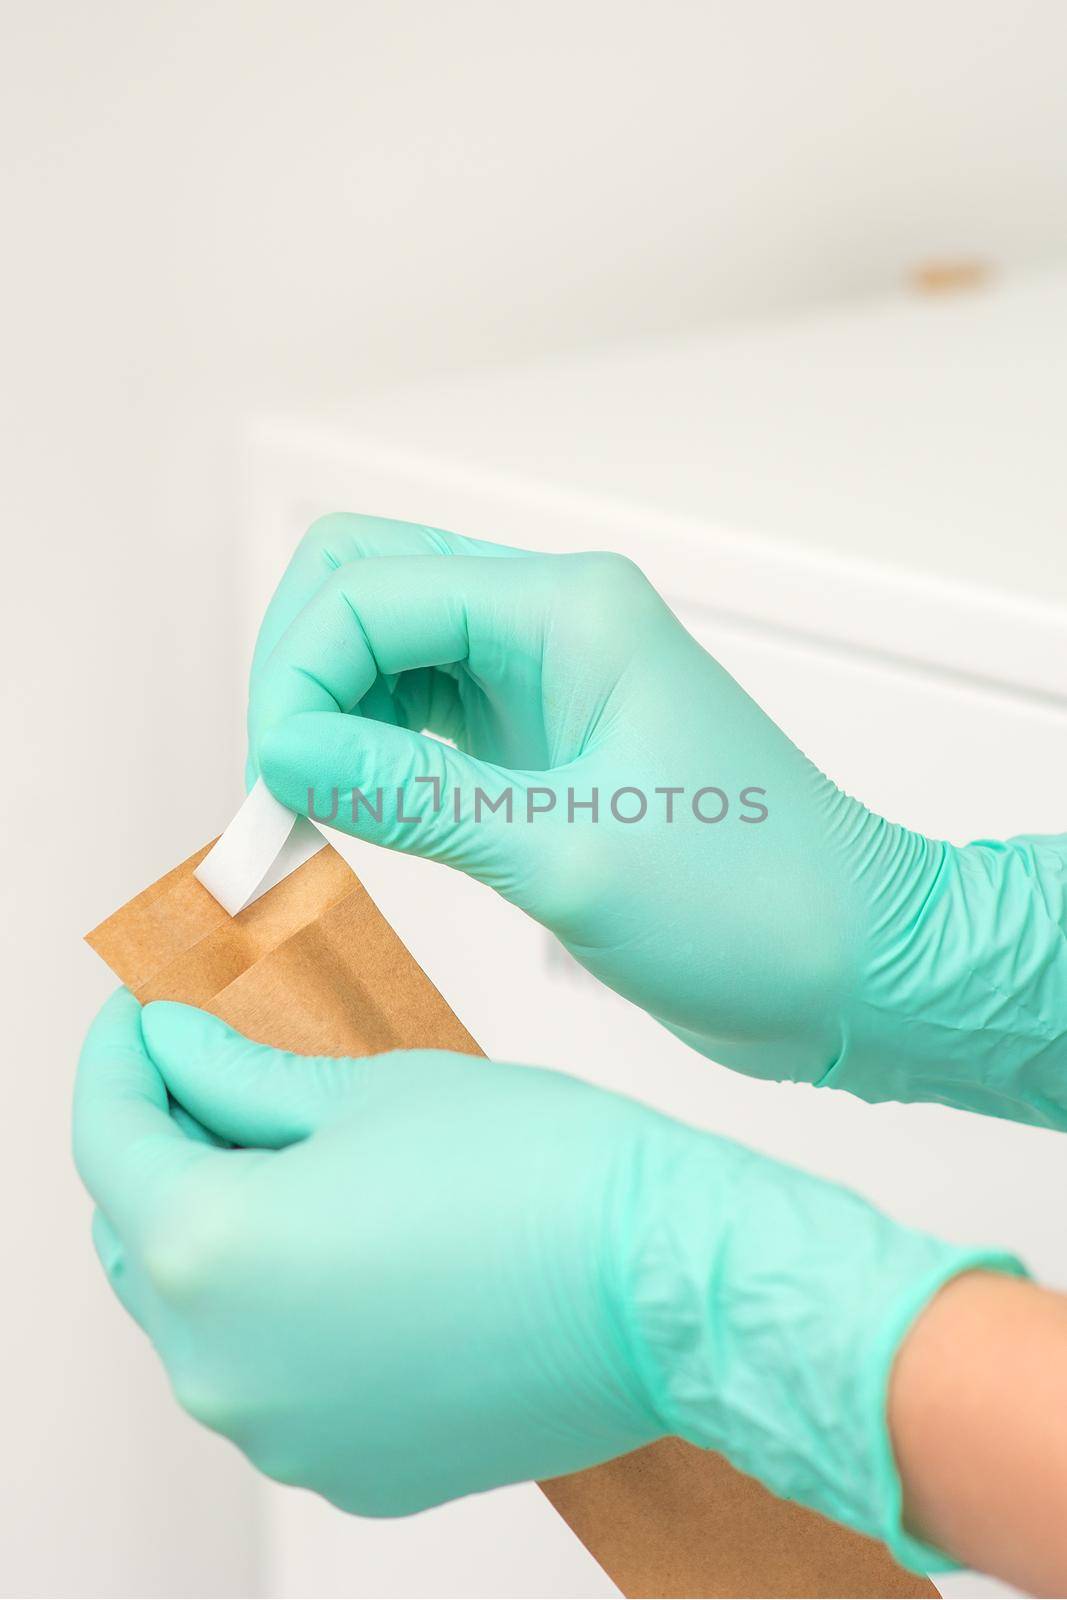 Beautician in green protective gloves holds a craft envelope to sterilize tools before disinfection